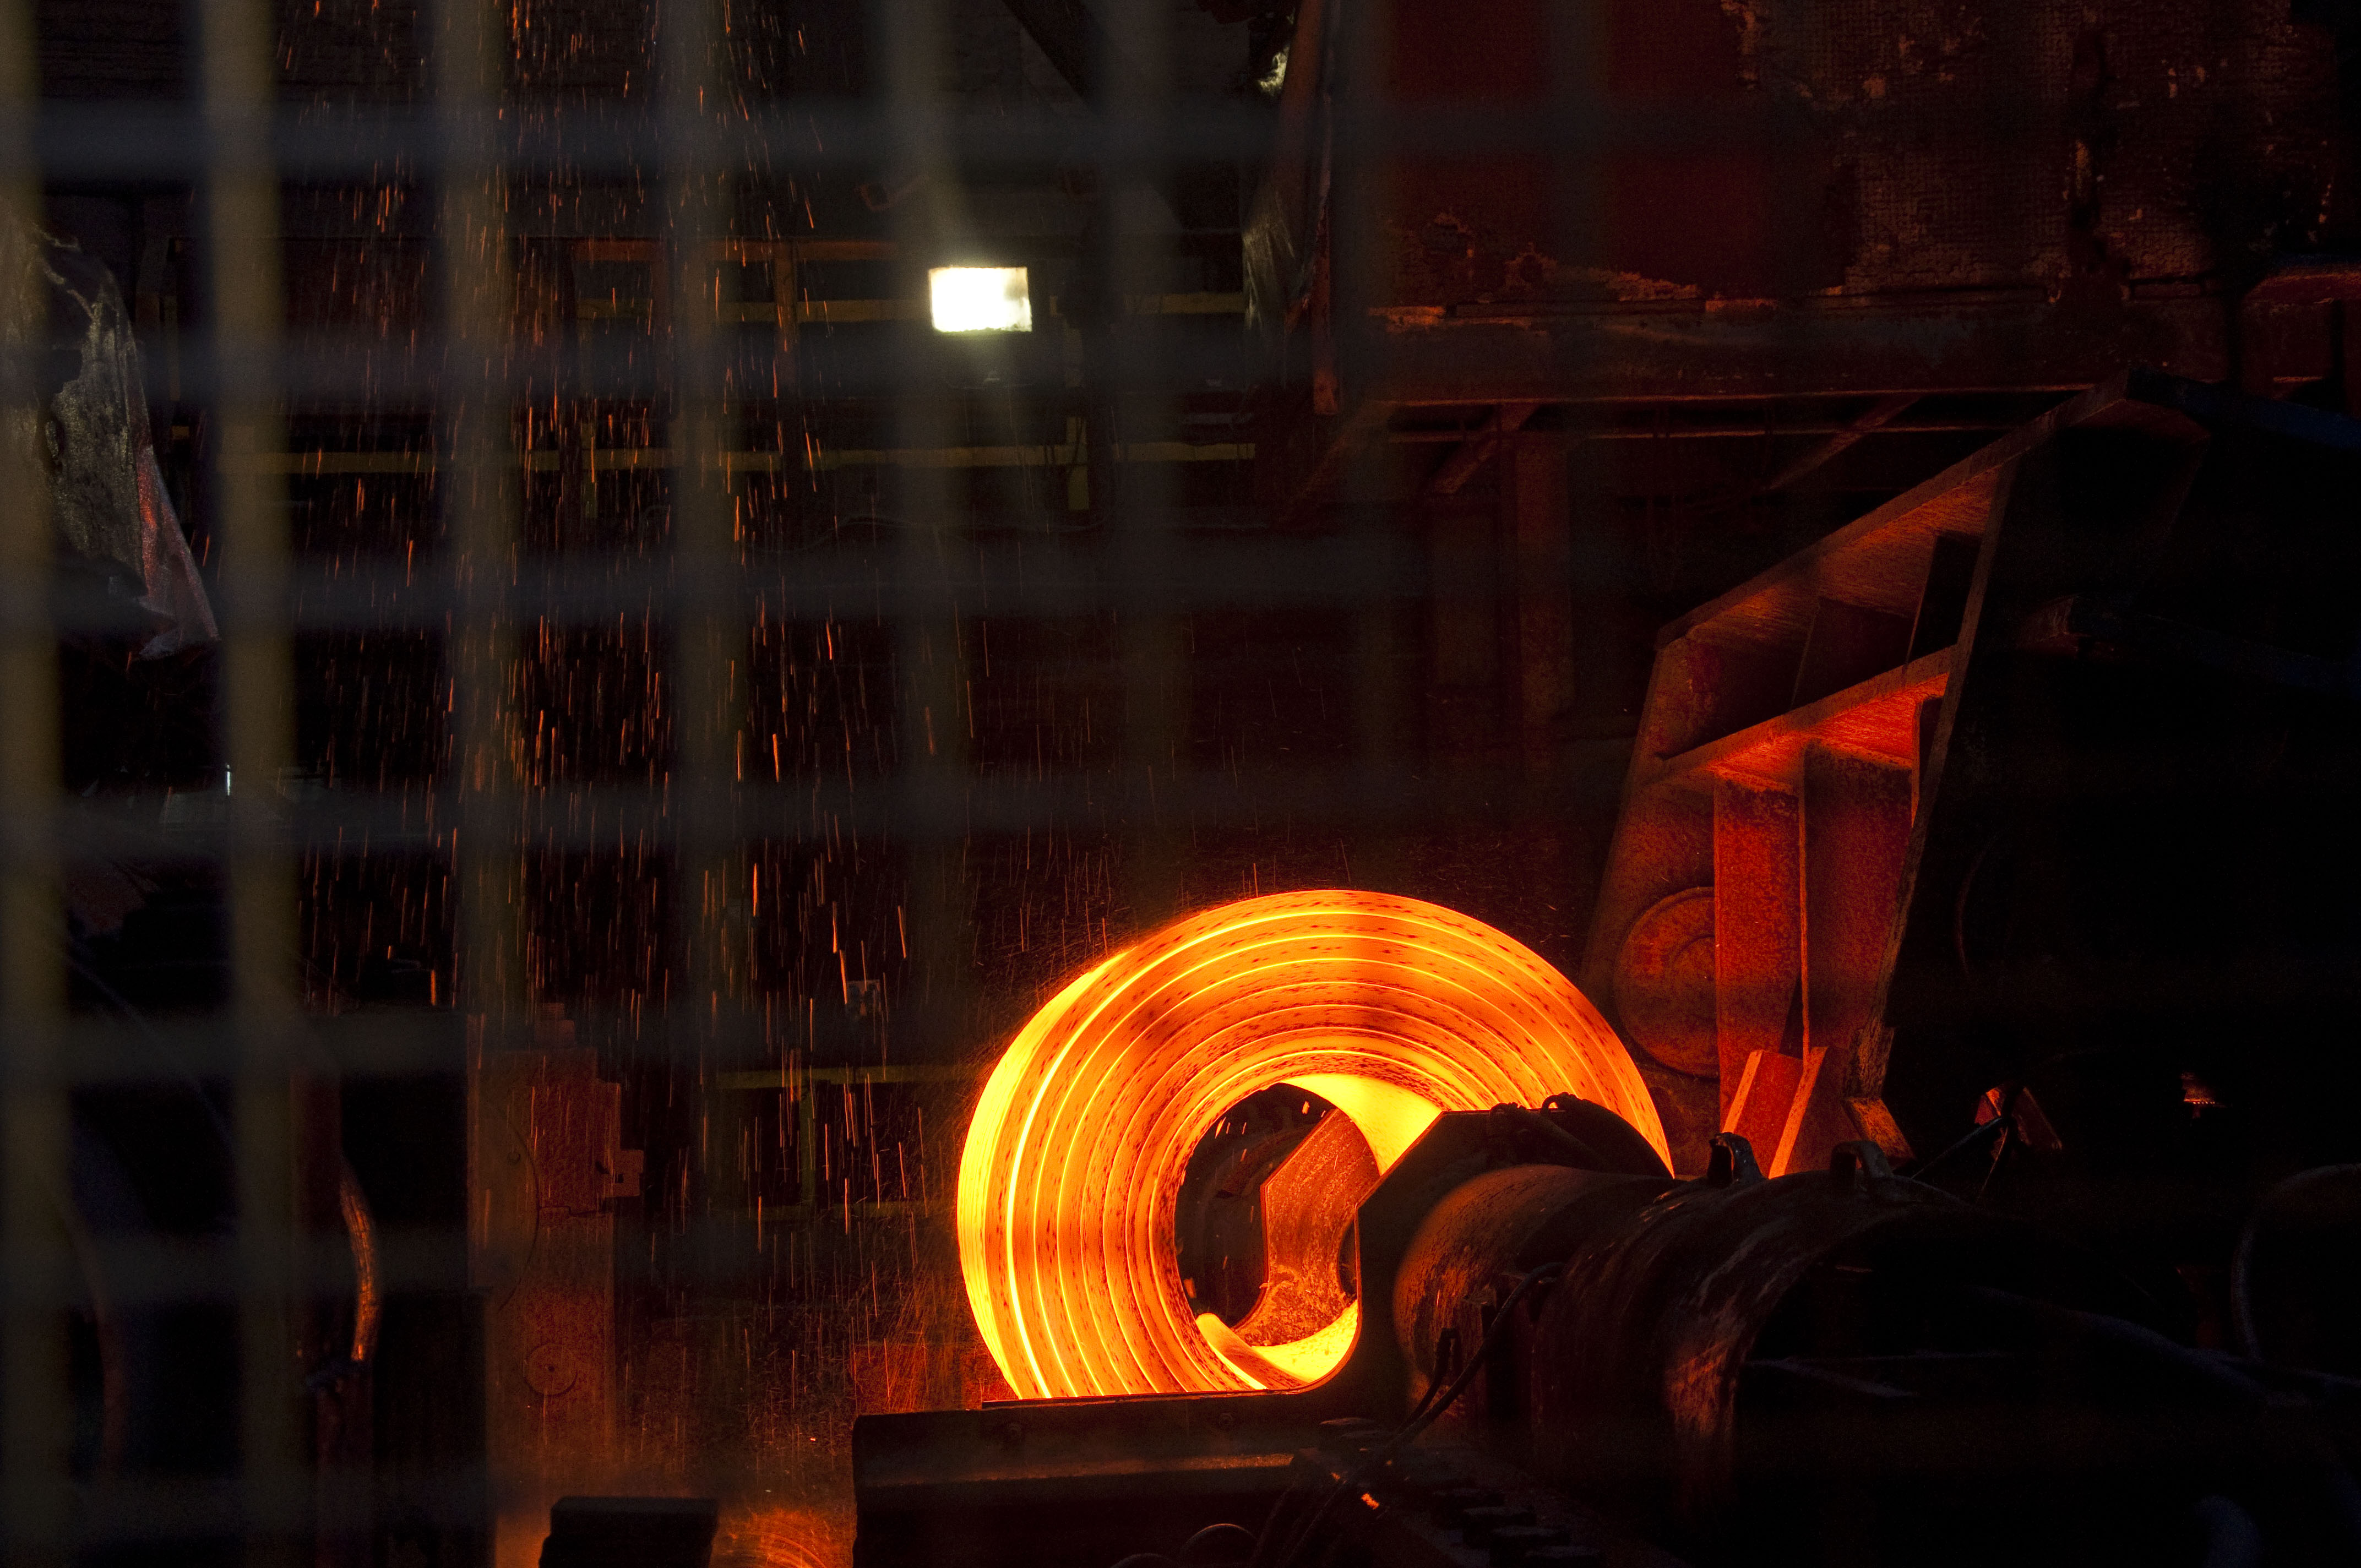 Hot-rolled coil produced at Port Talbot steelworks